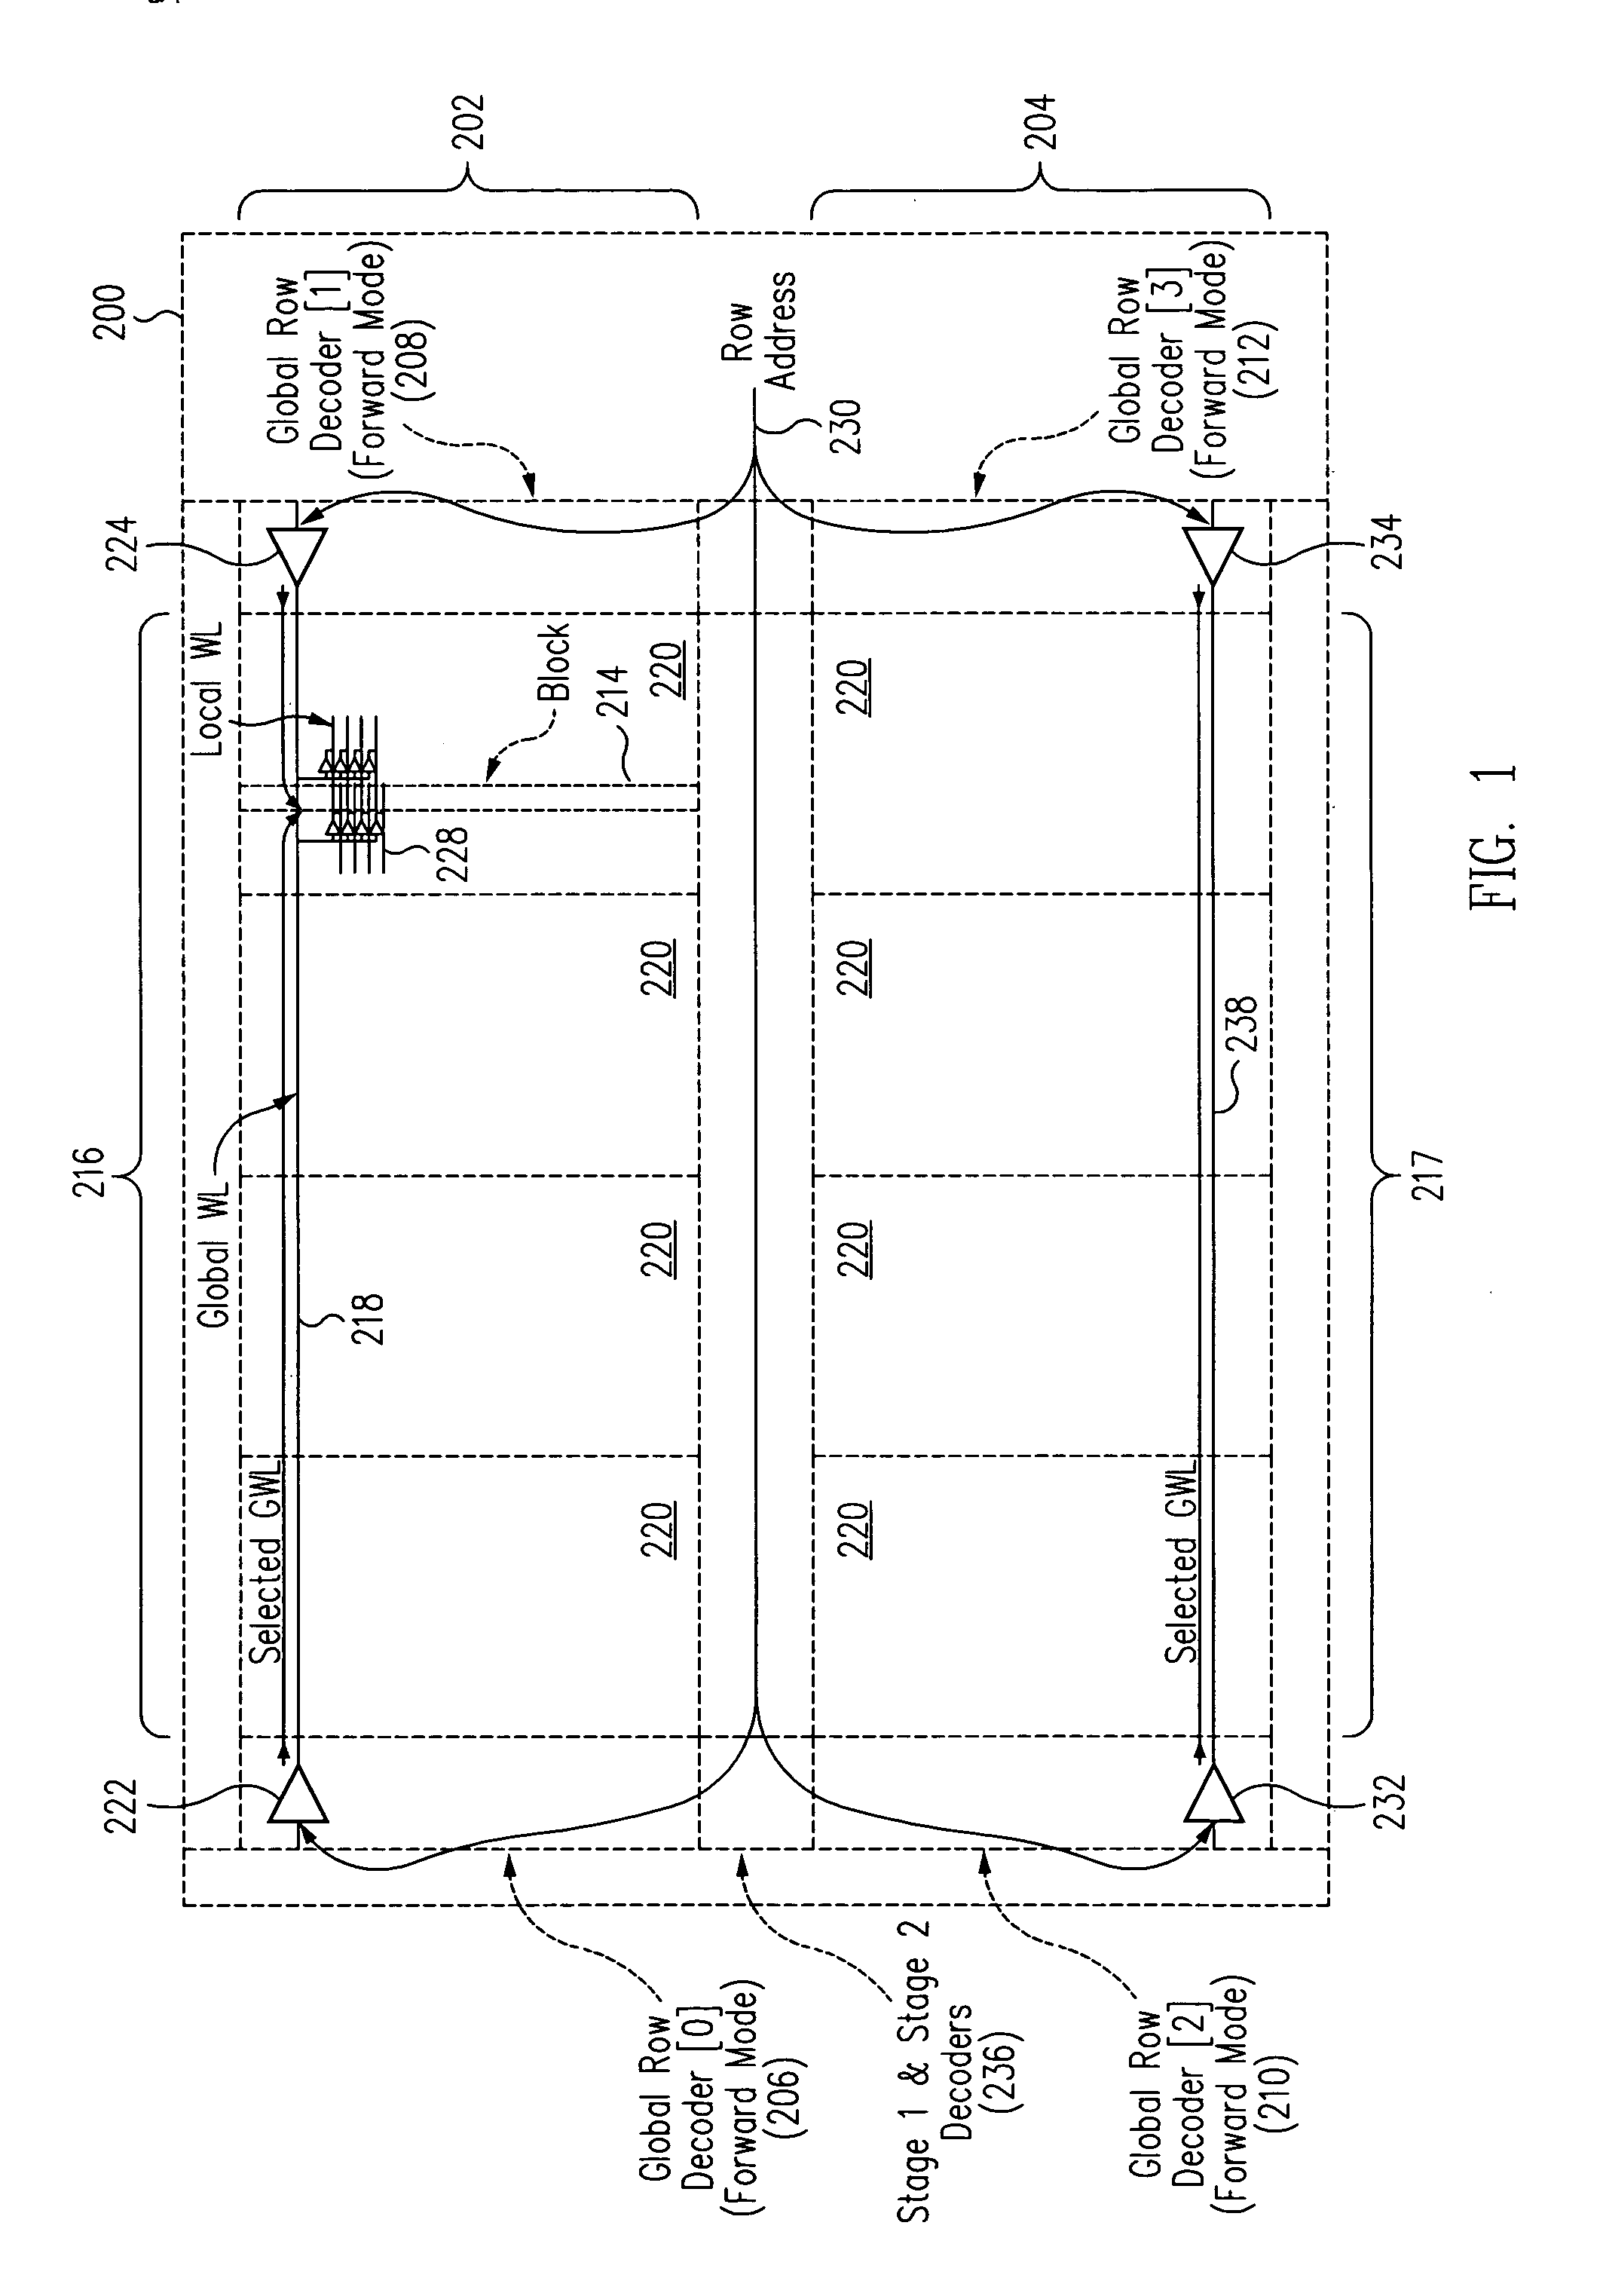 Dual-mode decoder circuit, integrated circuit memory array incorporating same, and related methods of operation